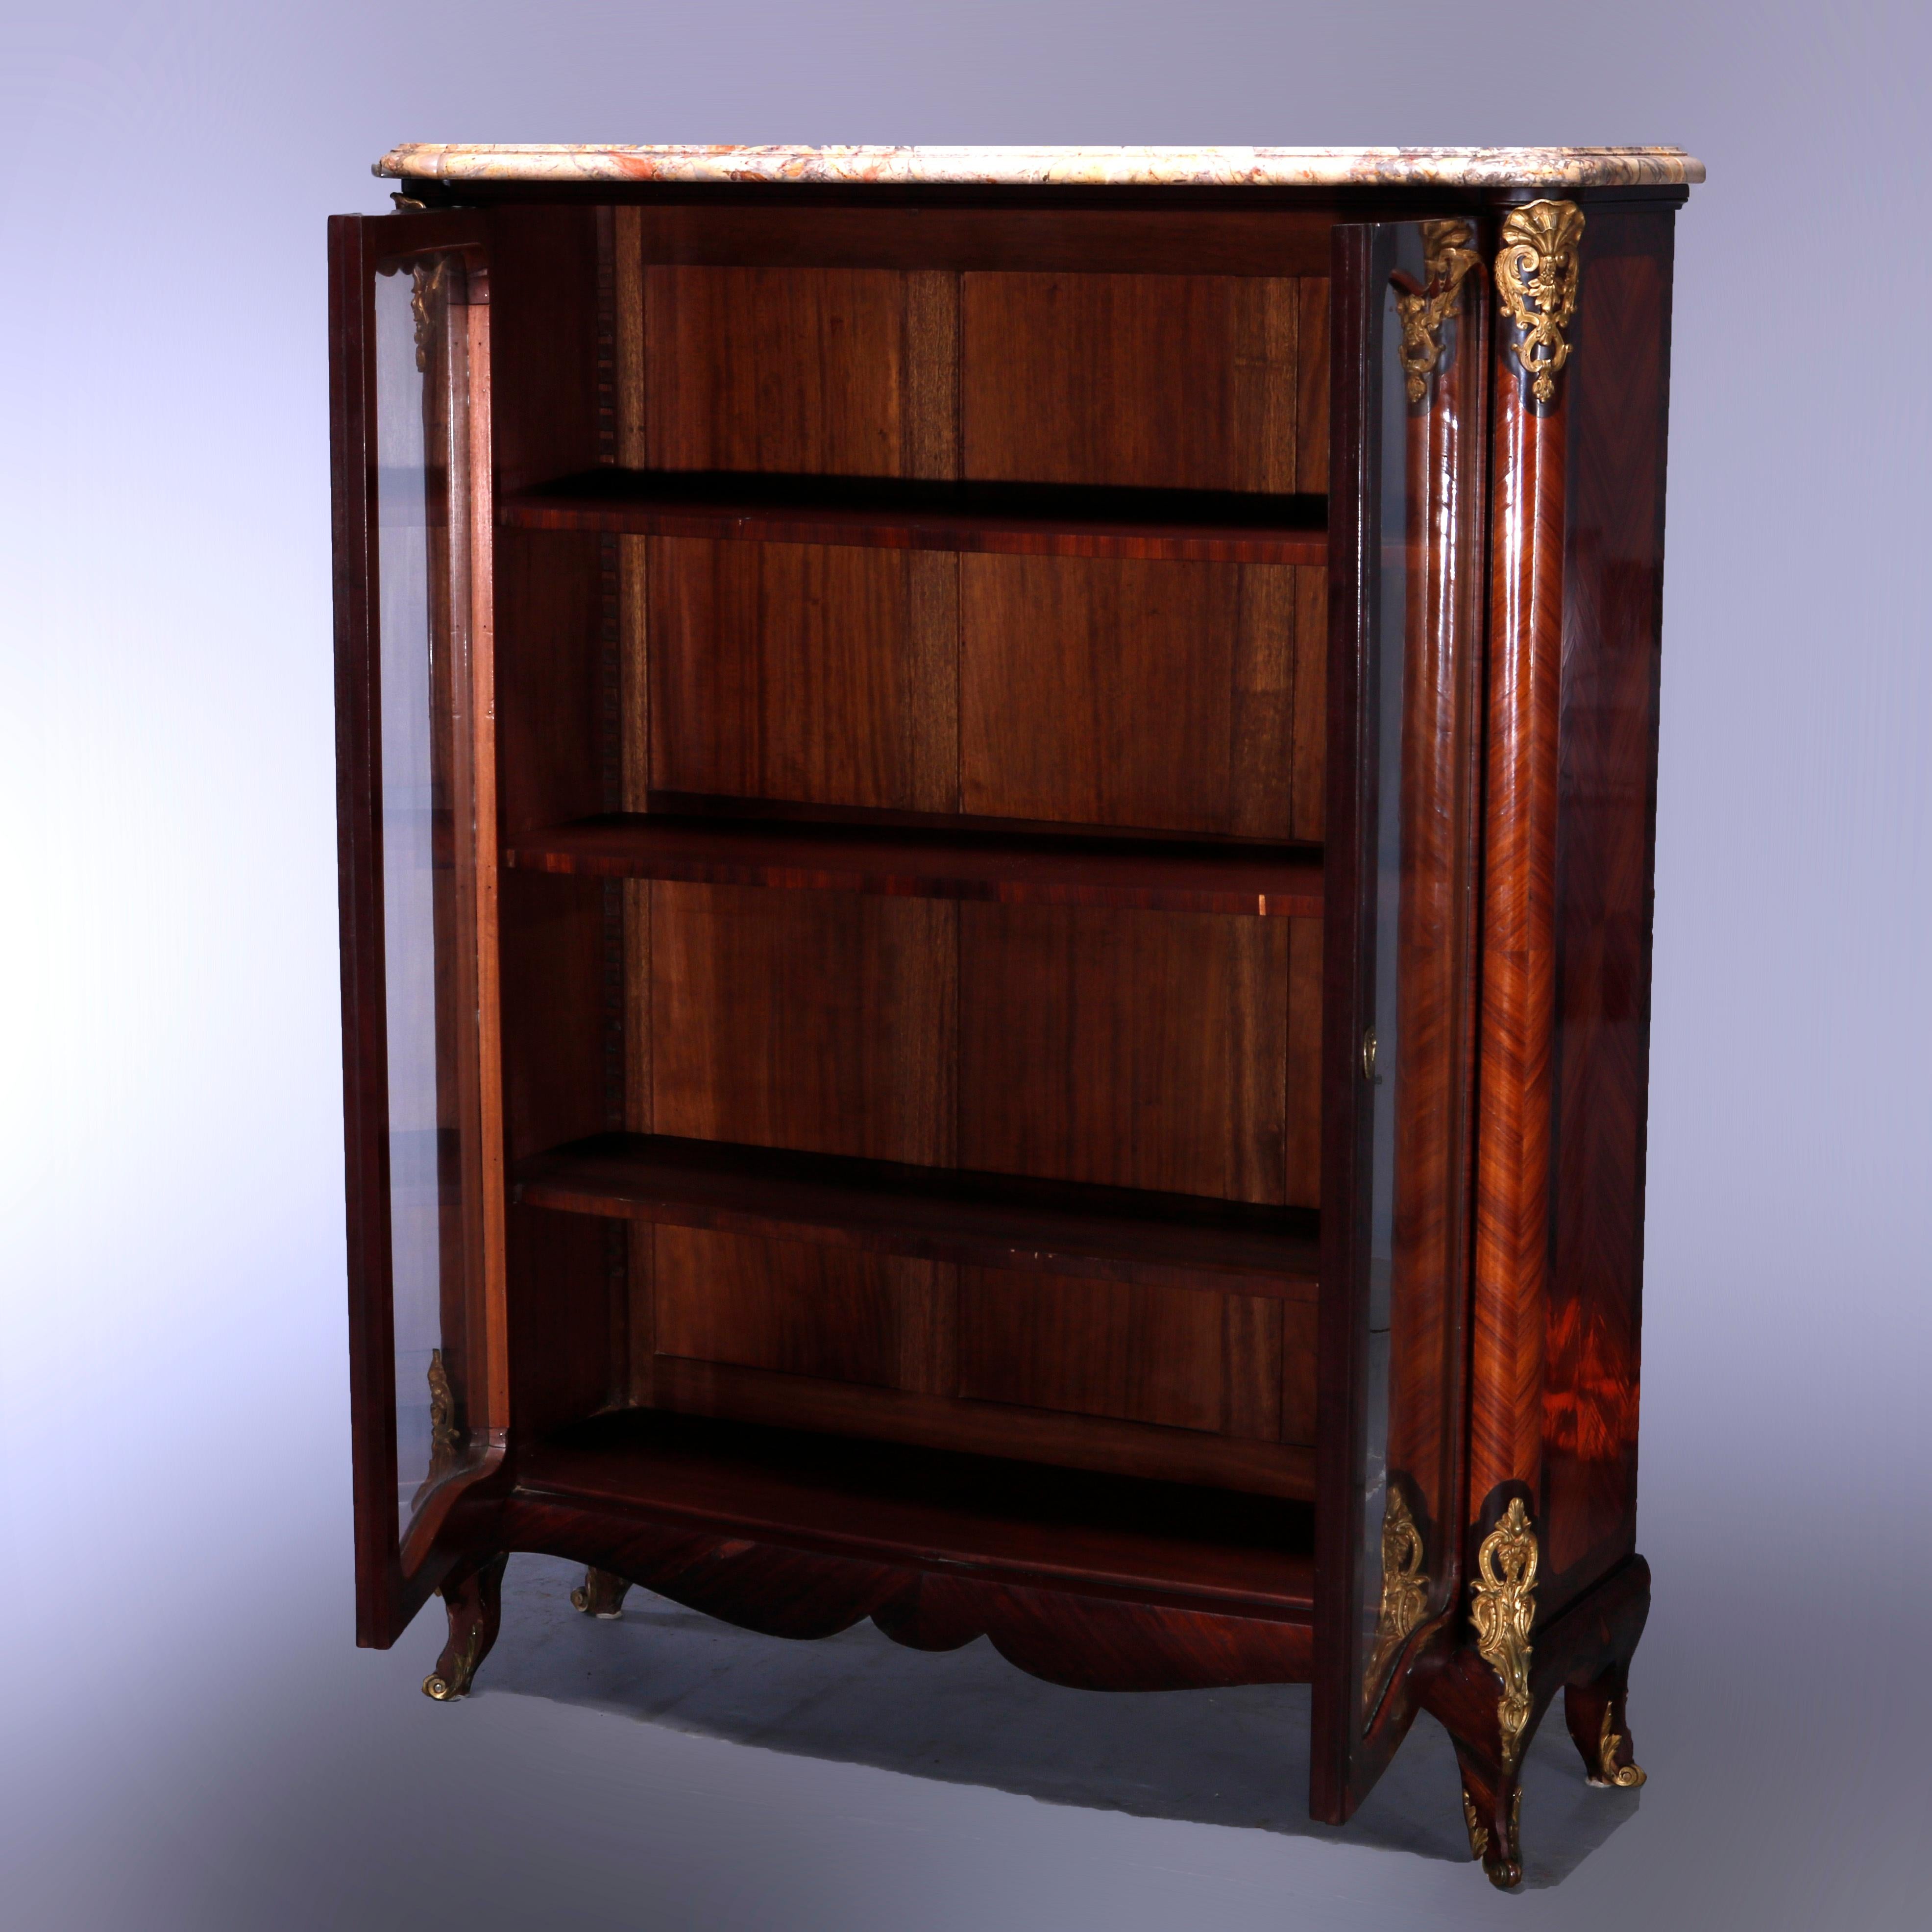 Antique French Louis XV Kingwood, Marble & Ormolu Bookcase by E. Poteau, c1870 For Sale 2